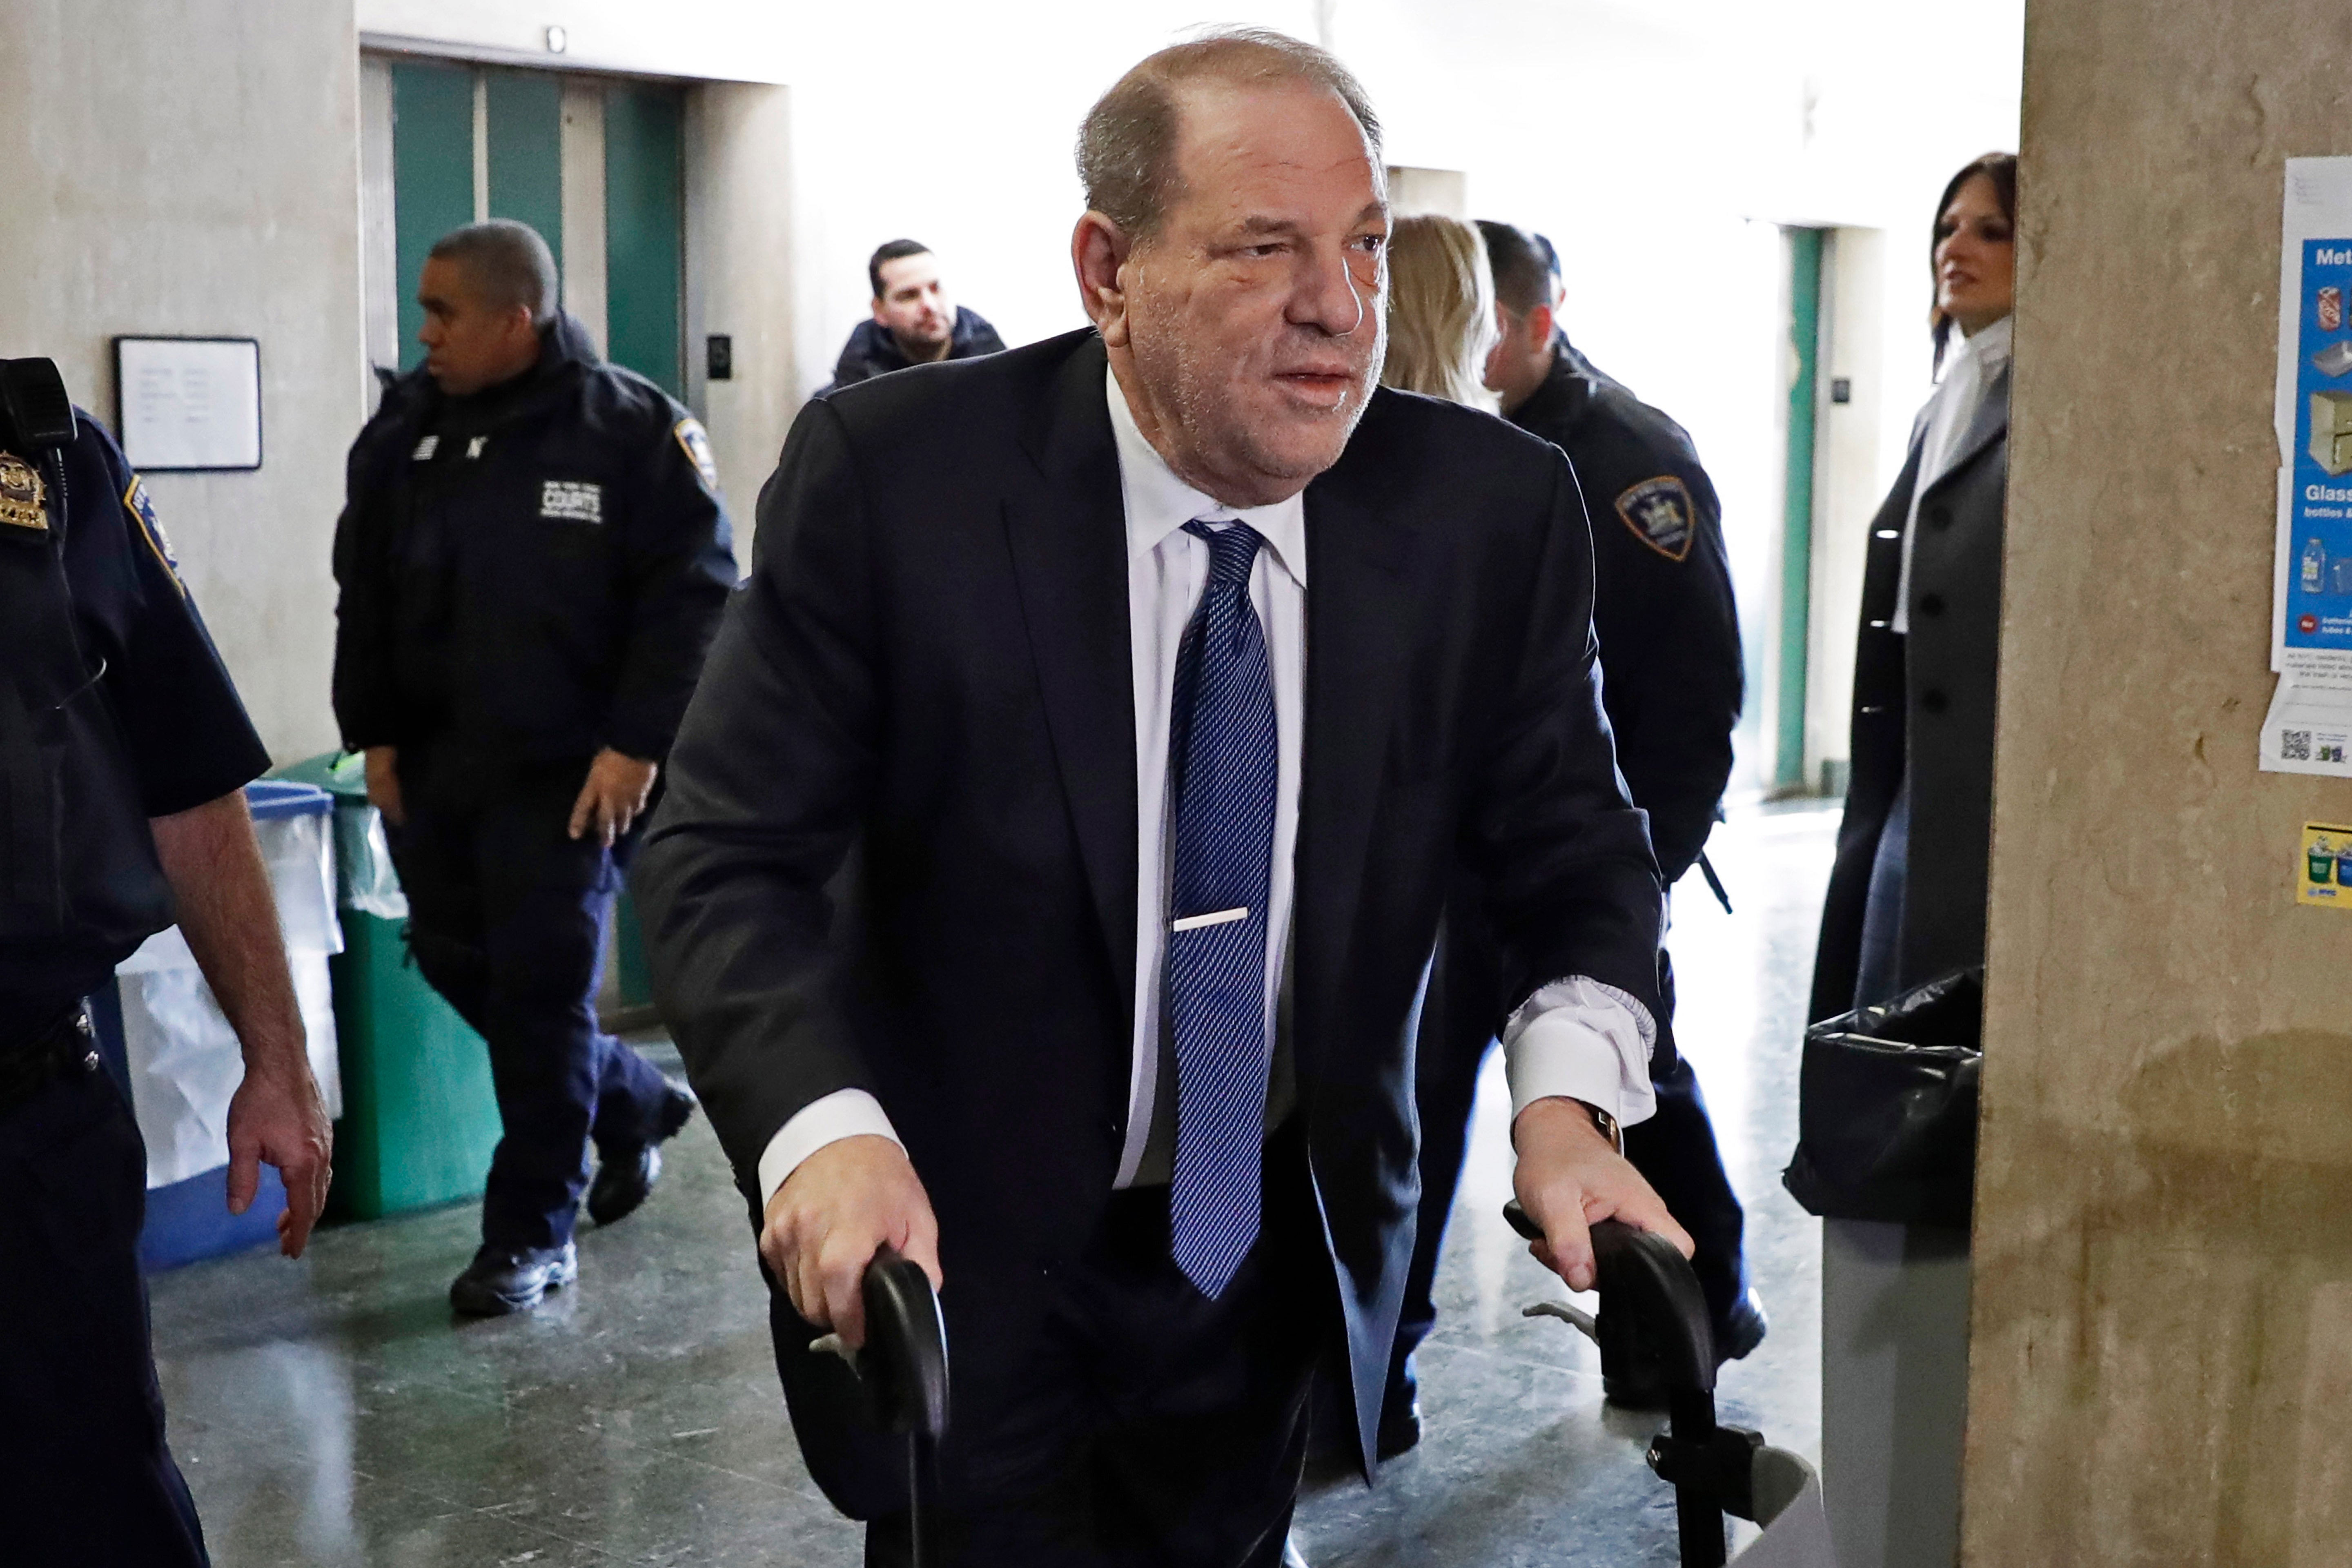 Harvey Weinstein’s subsequent imprisonment after 2017 for sexual assault has not ended misconduct in the film industry